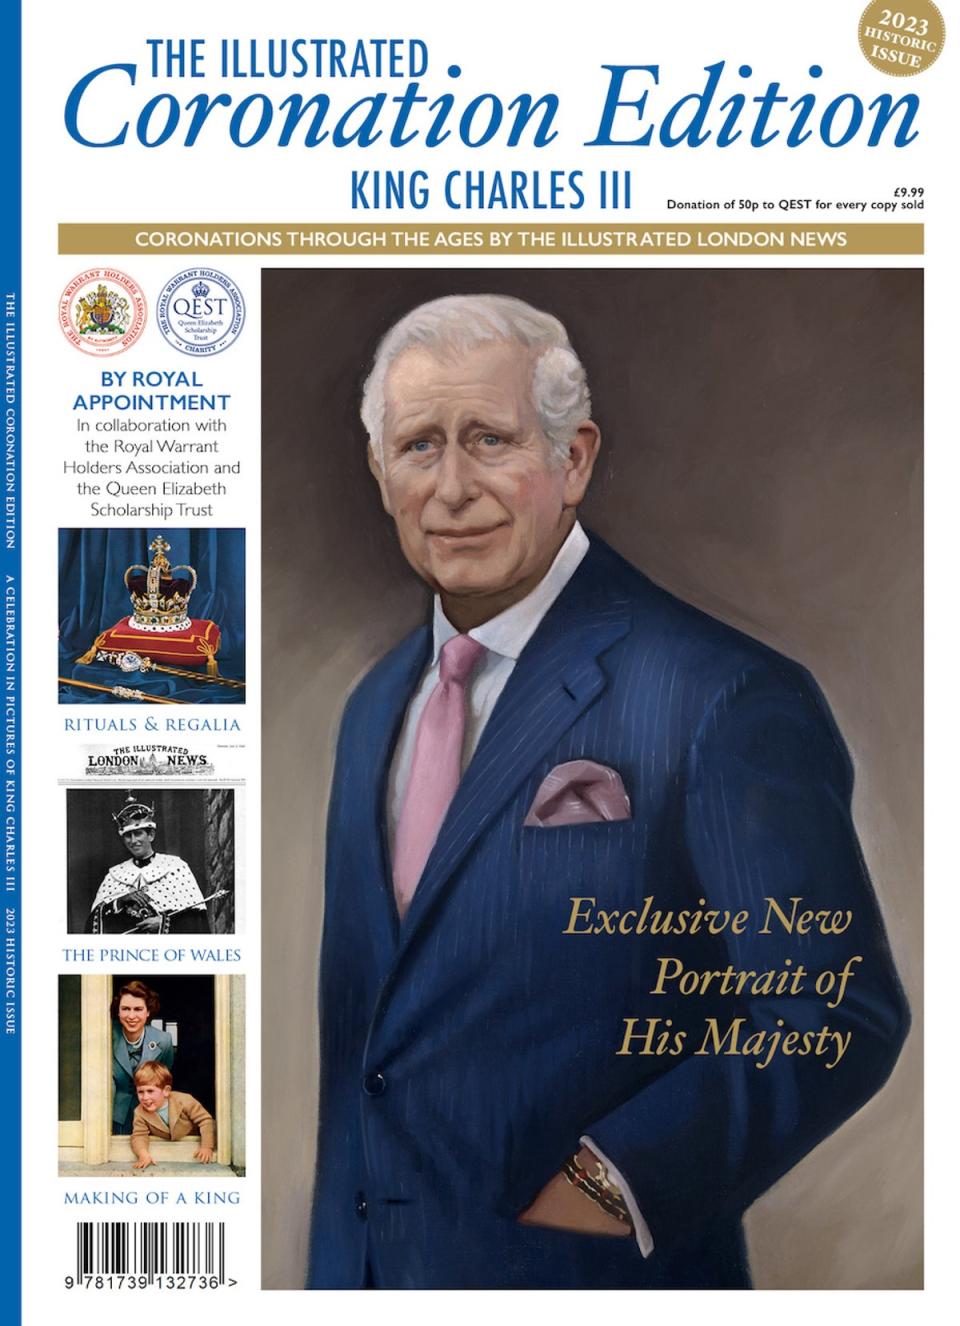 Portrait of King Charles III by Alastair Barford (c) Illustrated London News. The Illustrated Coronation Edition is published by Illustrated London News and is on sale though leading supermarkets and WH Smith from 30 March (PA)